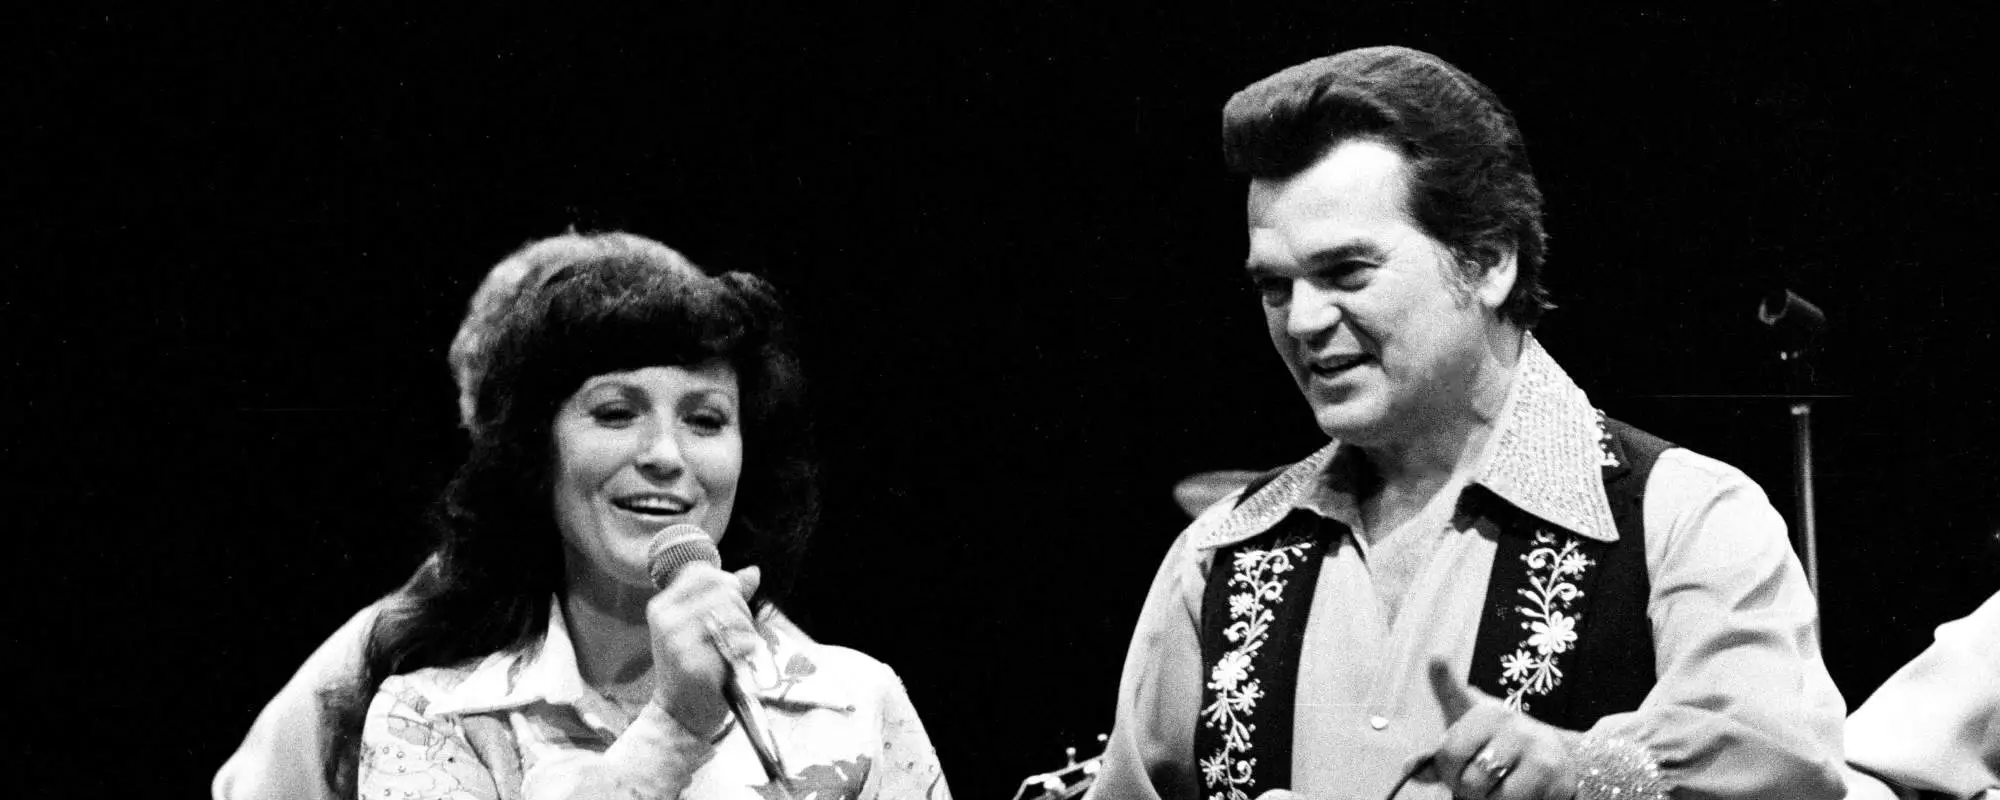 The History Behind the Country Duo Conway Twitty & Loretta Lynn